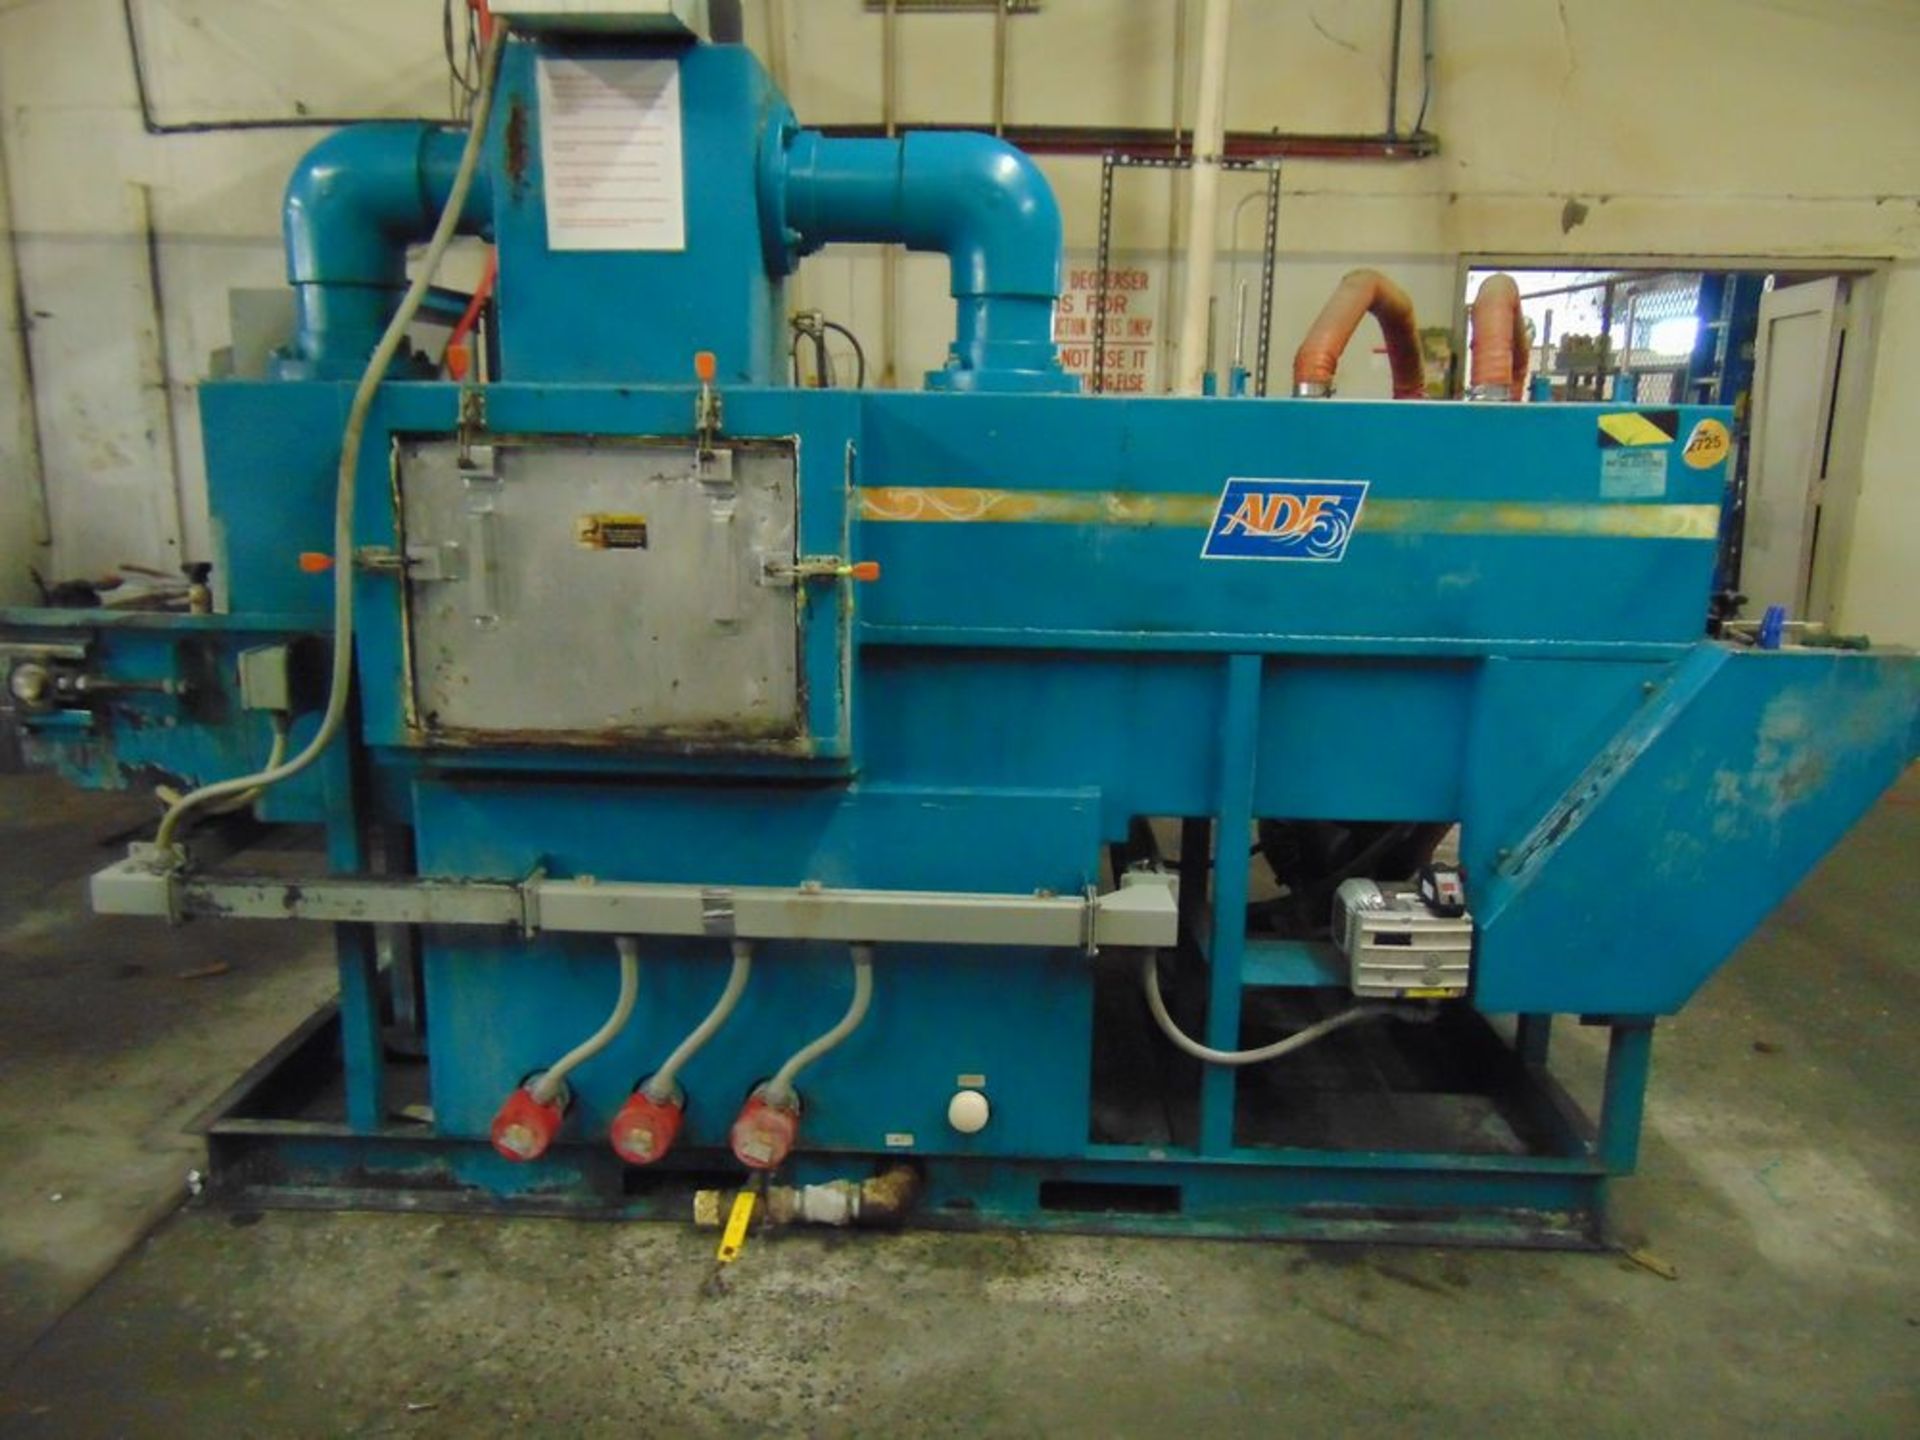 ADF 1' x 6' Conveyorized Parts Washer S/N 299-4492 (LOADING FEES: $450) - Image 2 of 3